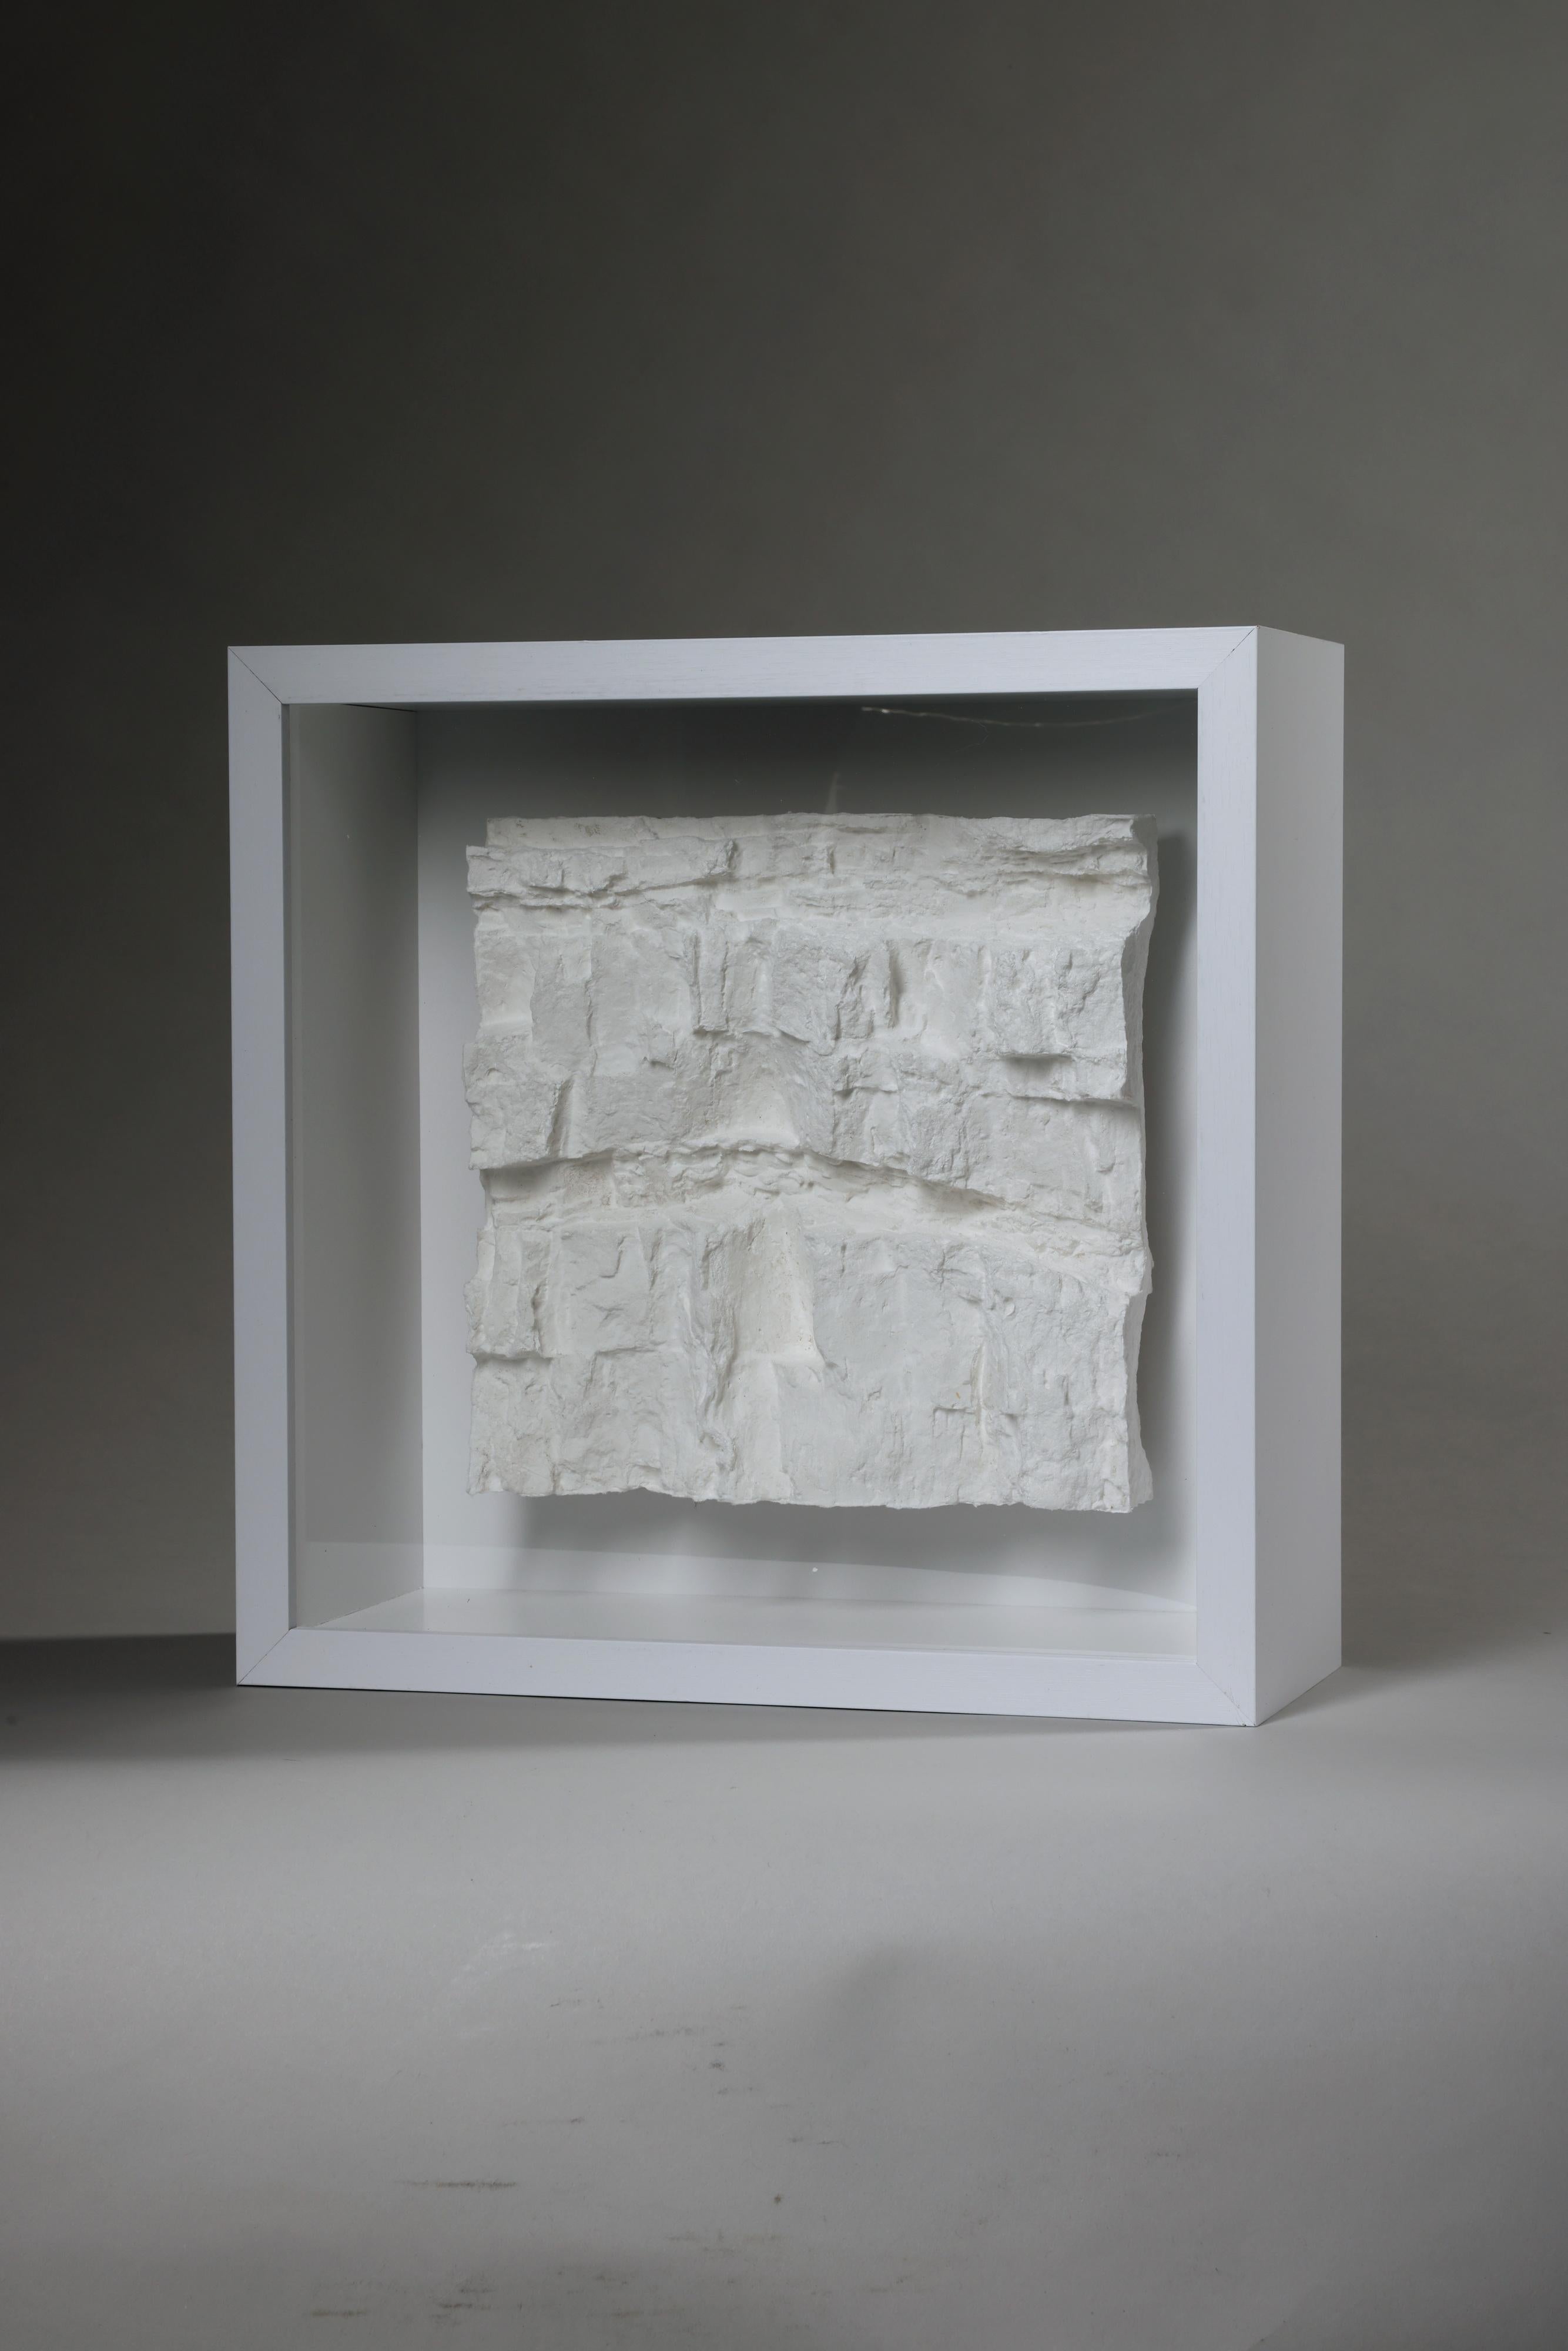 Please allow a two month turnaround time for this piece to be made. 

About Cast Paper In David's words:

“One thread running through my work is a connection to nature. Casting natural forms in glass has given me a way to be in dialogue with nature